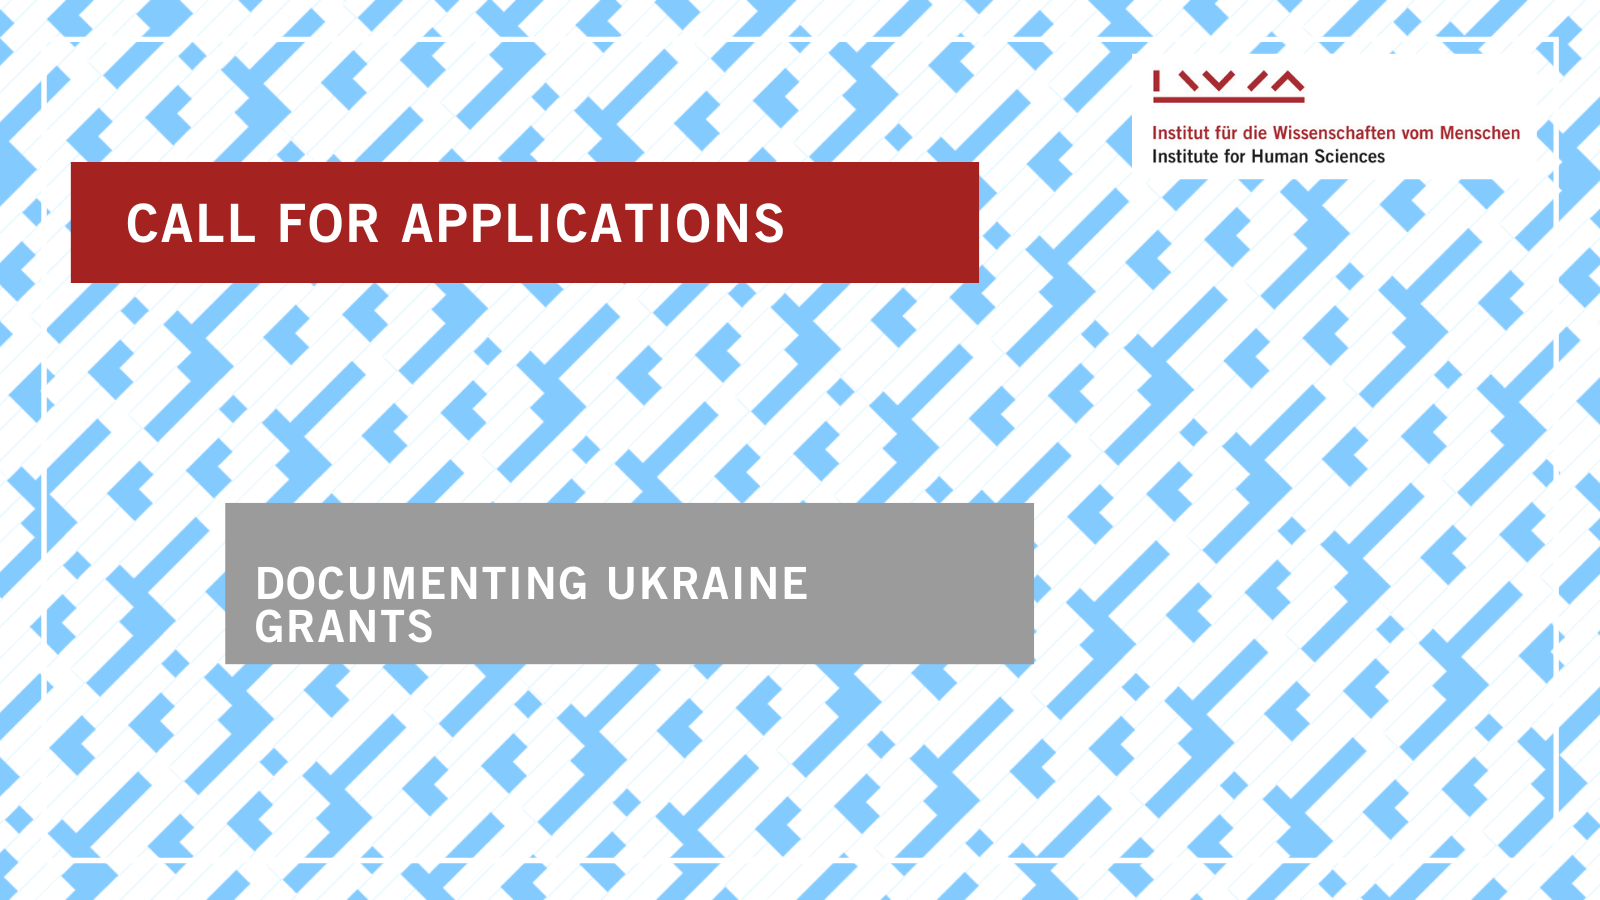 Call for Applications for the Documenting Ukraine grants with DocU visual design in the background